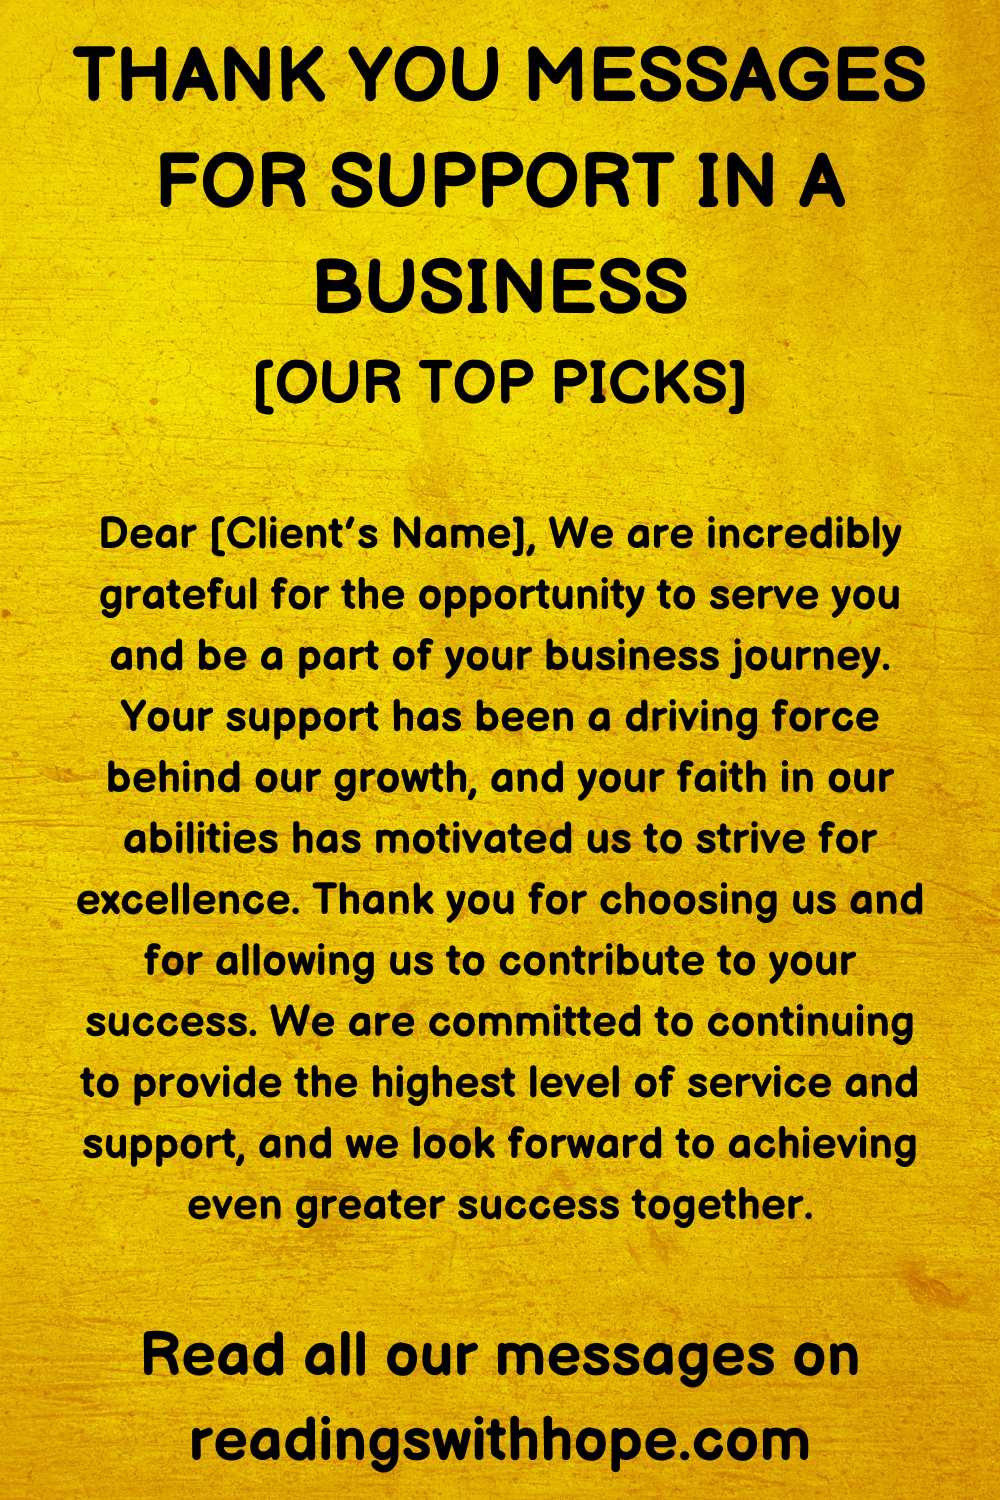 Thank You Message For Support in a Business